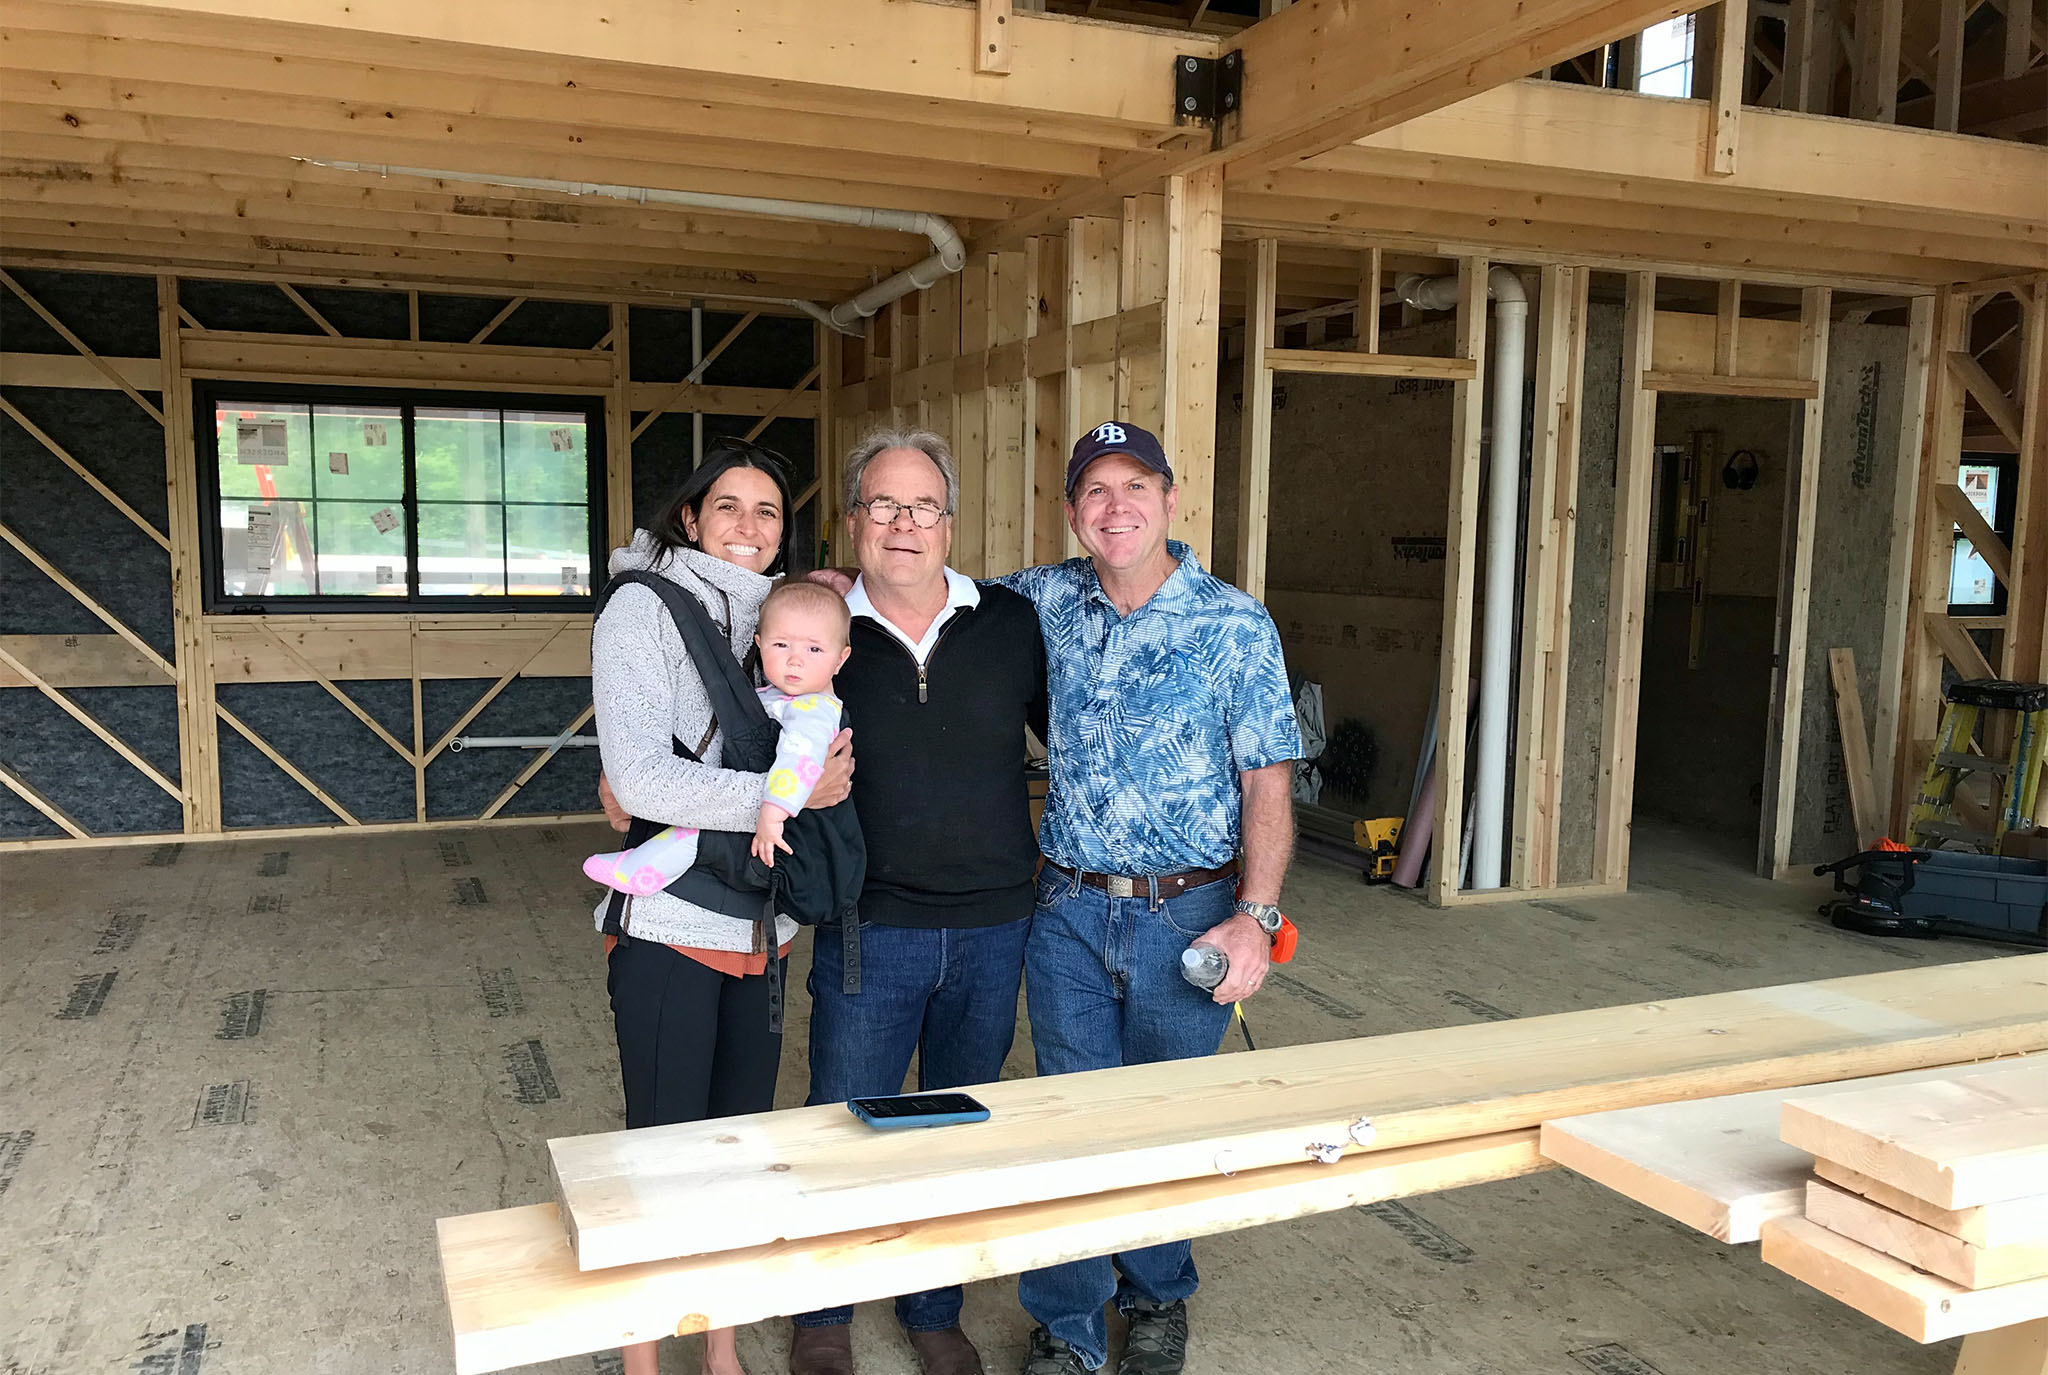 George Abetti of Geobarns meeting with clients for a construction inspection.